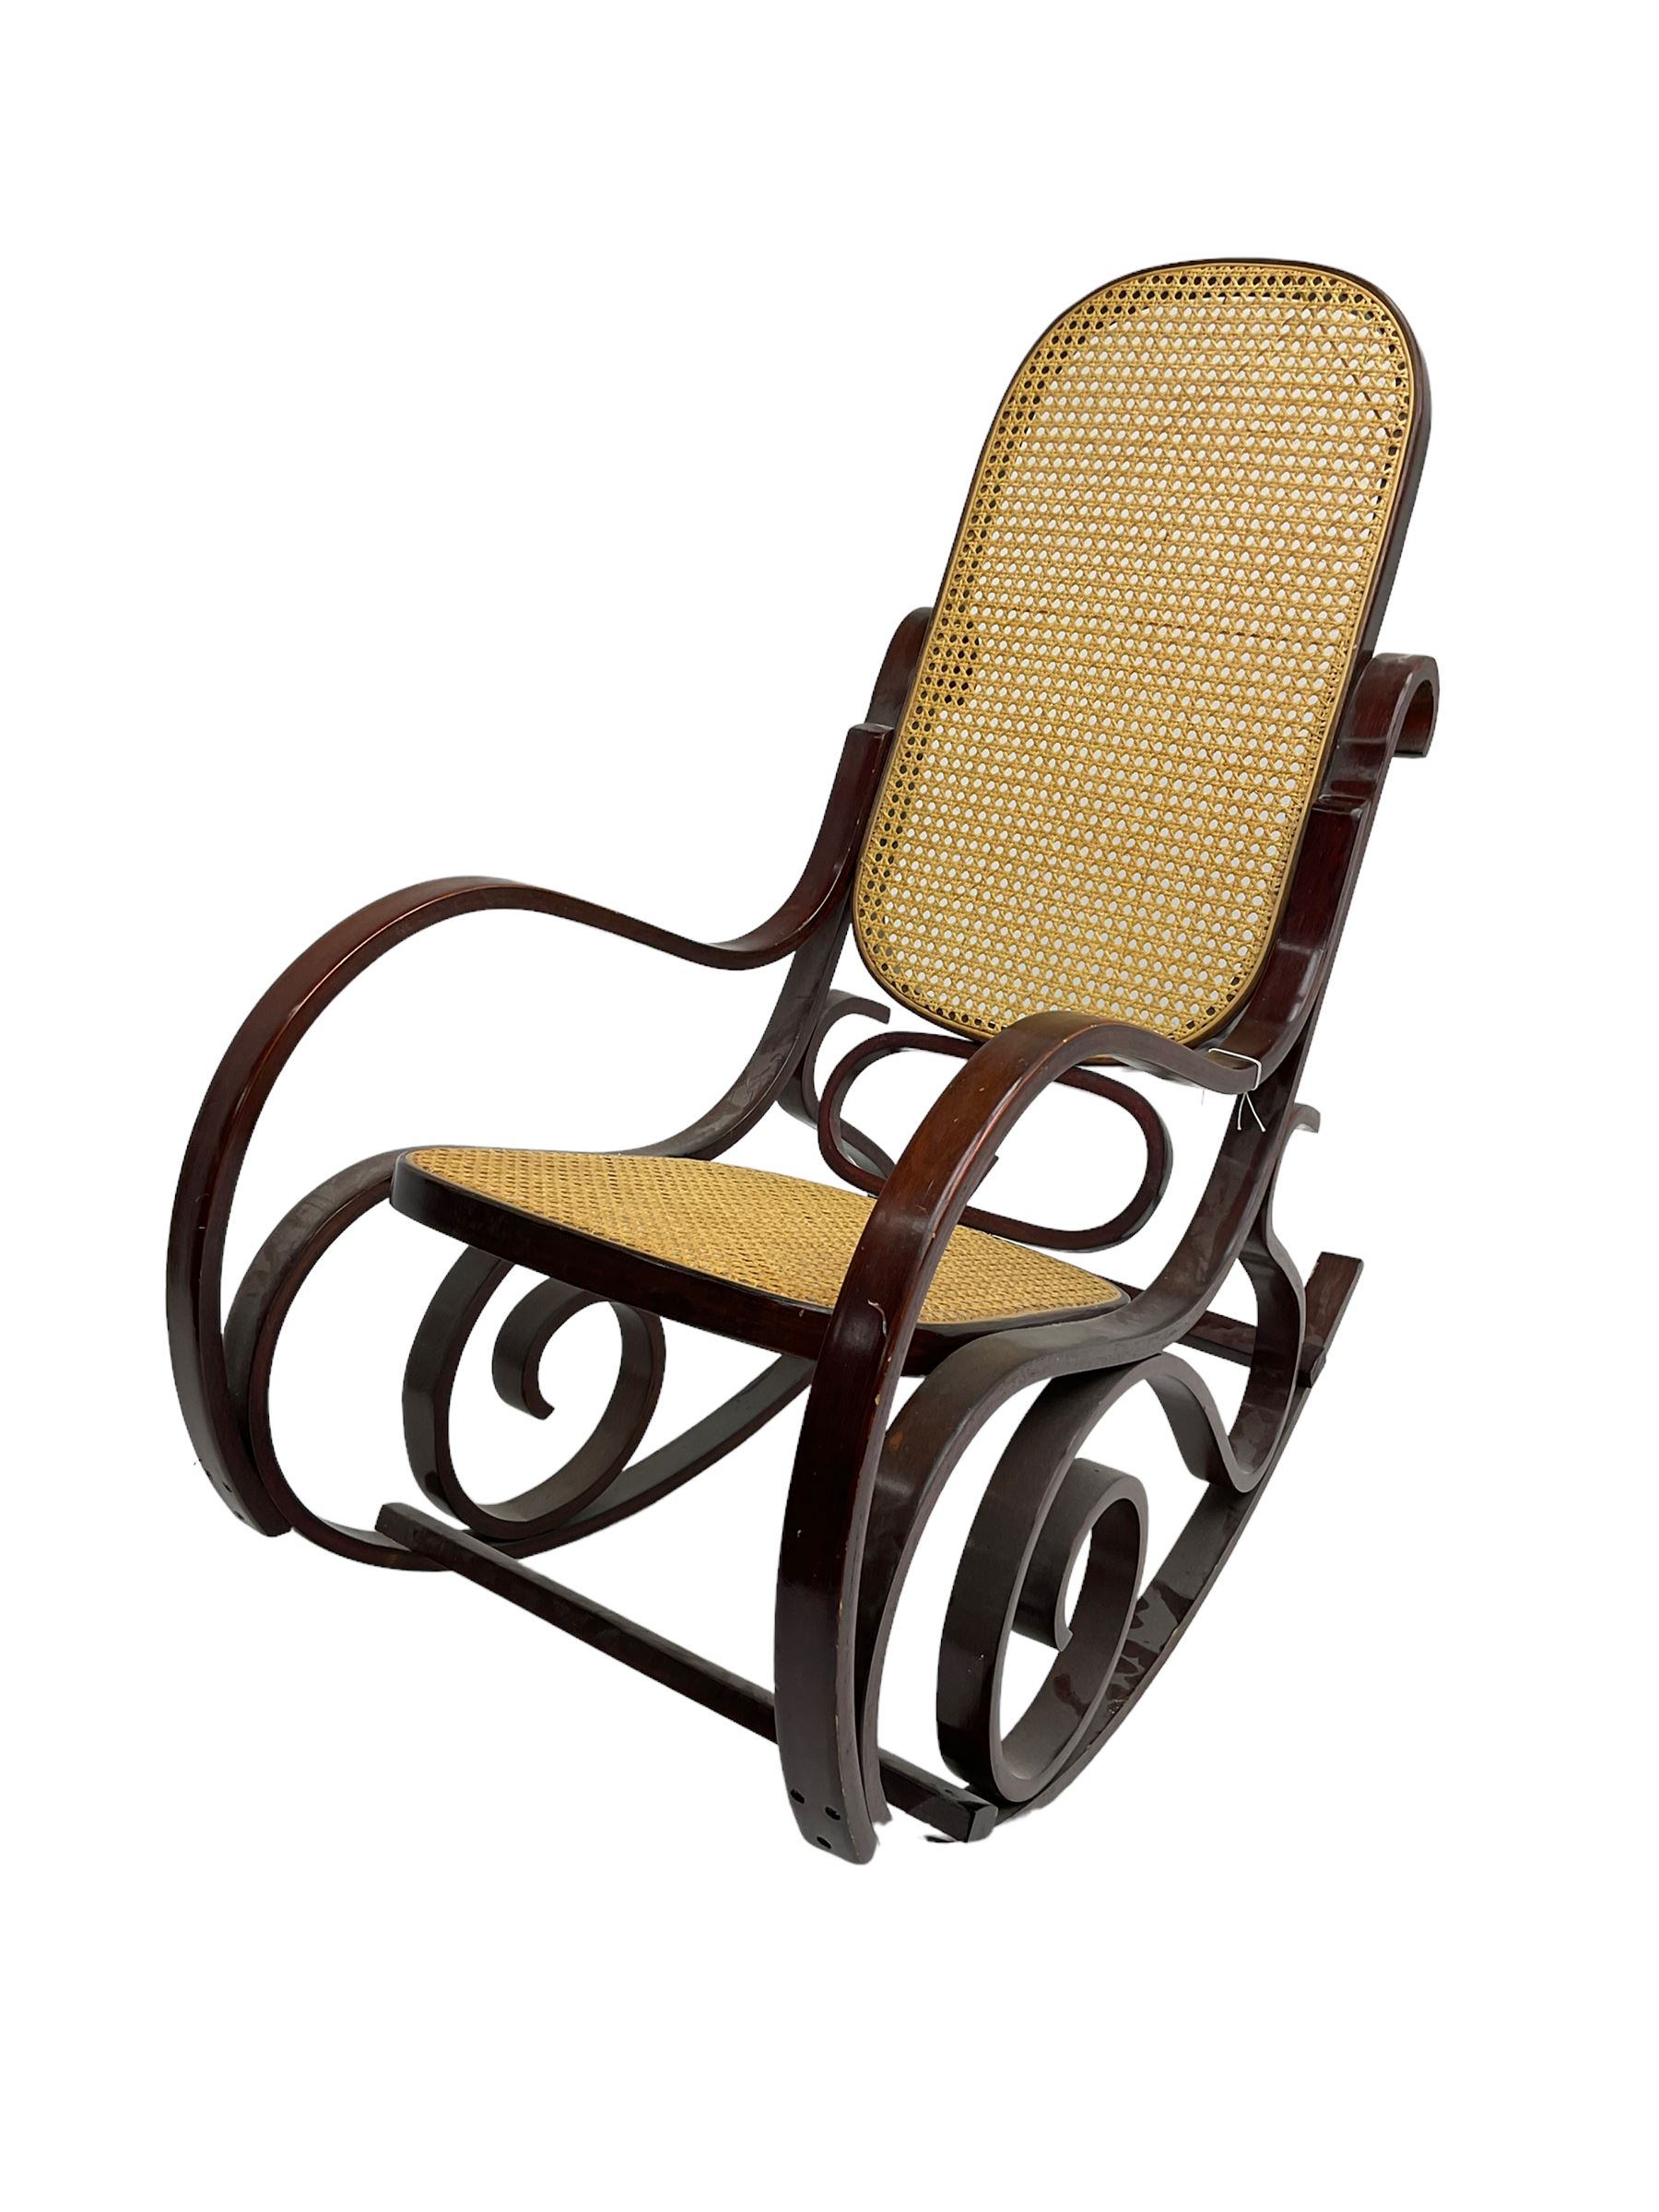 Thonet style rocking armchair - Image 2 of 5